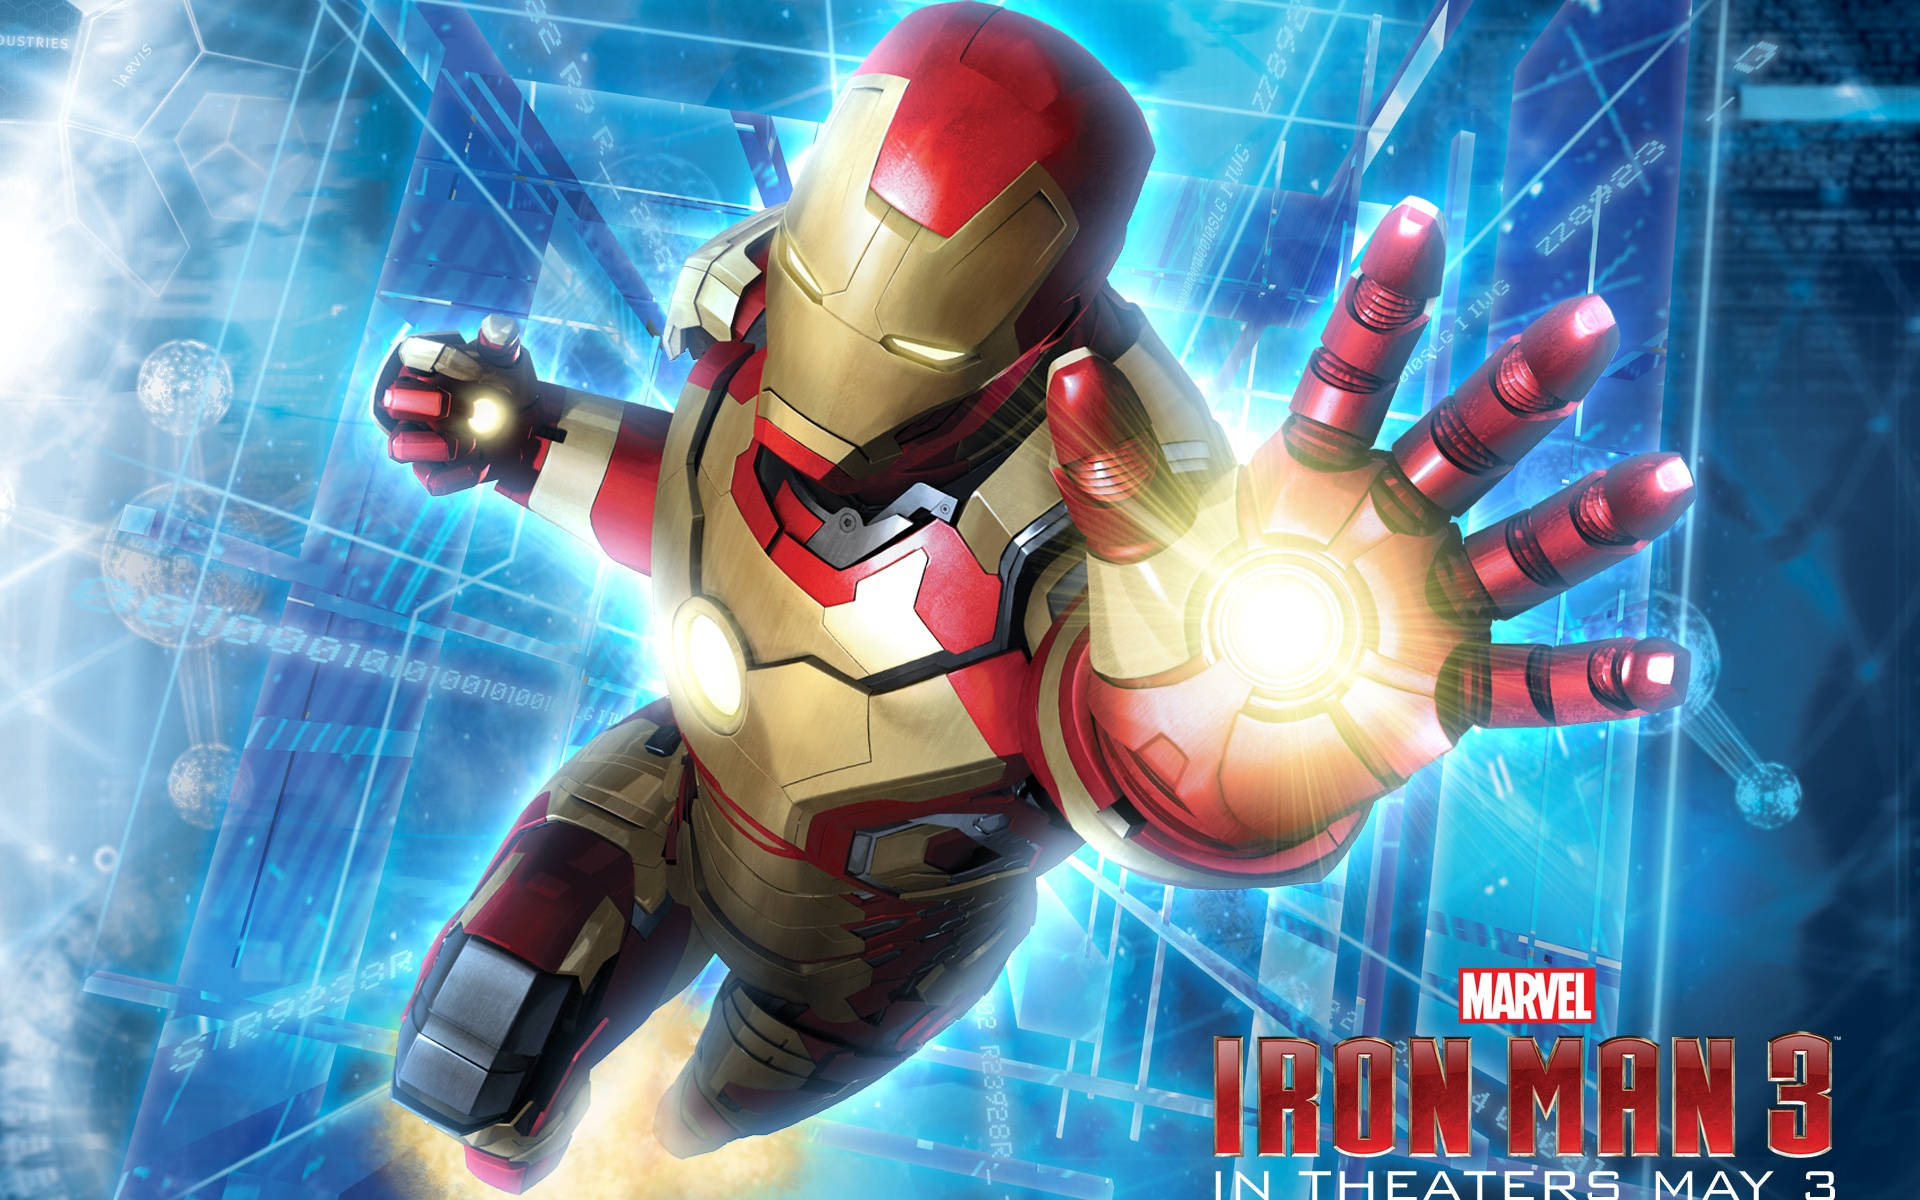 Cool Iron Man 3 Movie Poster Background